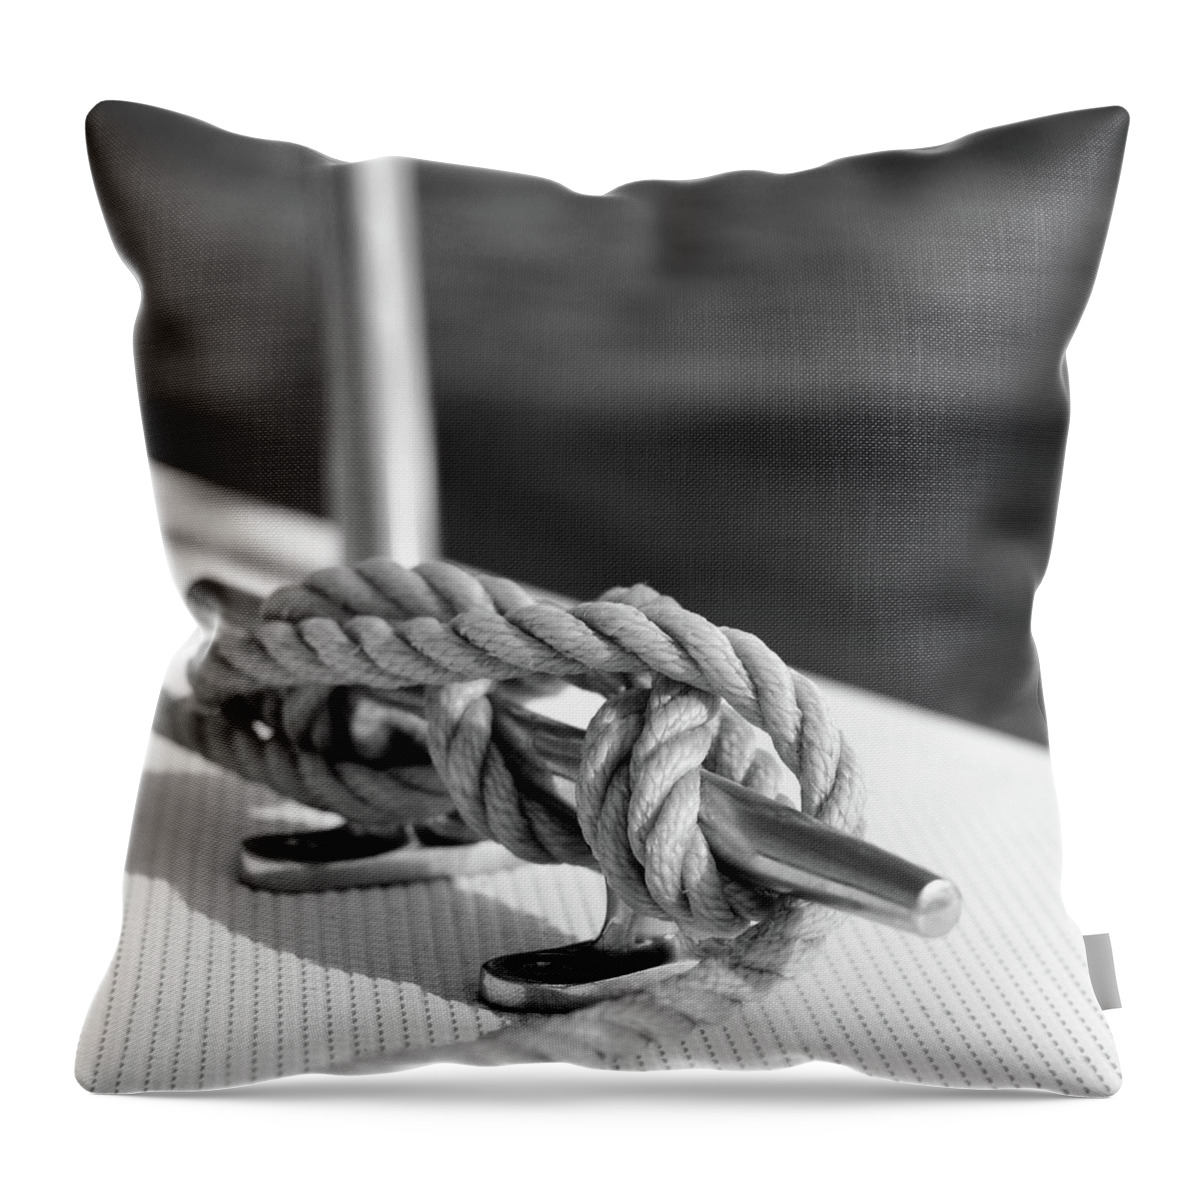 Sailors Knot Throw Pillow featuring the photograph Sailor's Knot Square by Laura Fasulo